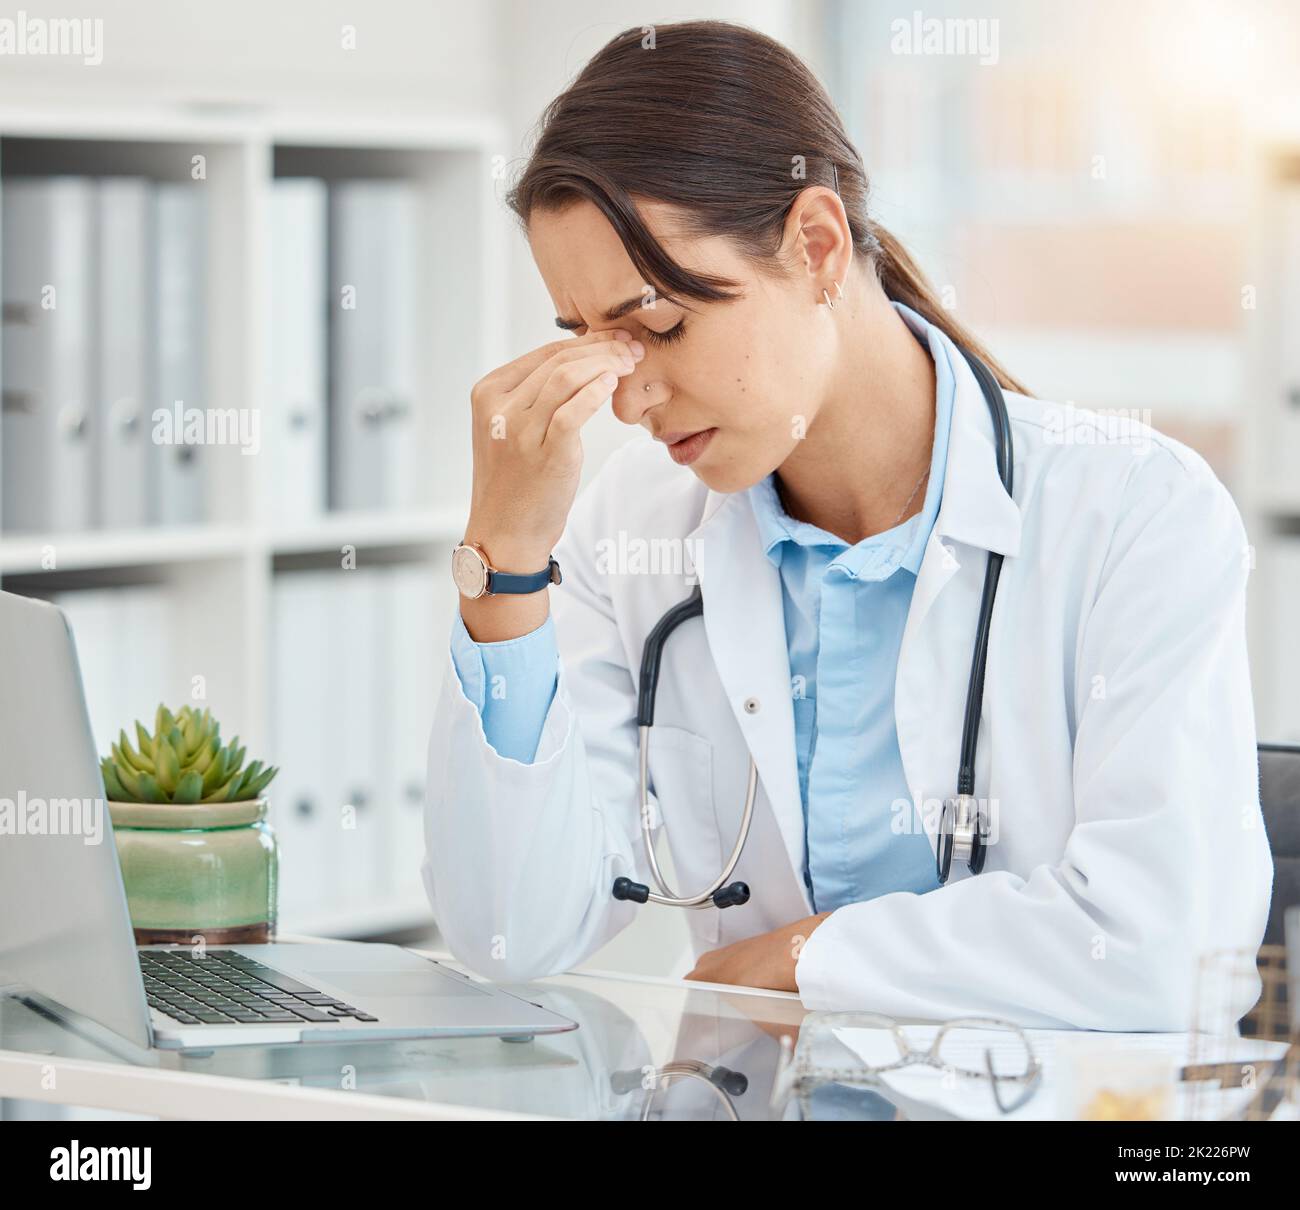 Stress, depression and tired female doctor suffering from a headache or mental health while sitting in an office with laptop. Frustrated, upset and Stock Photo